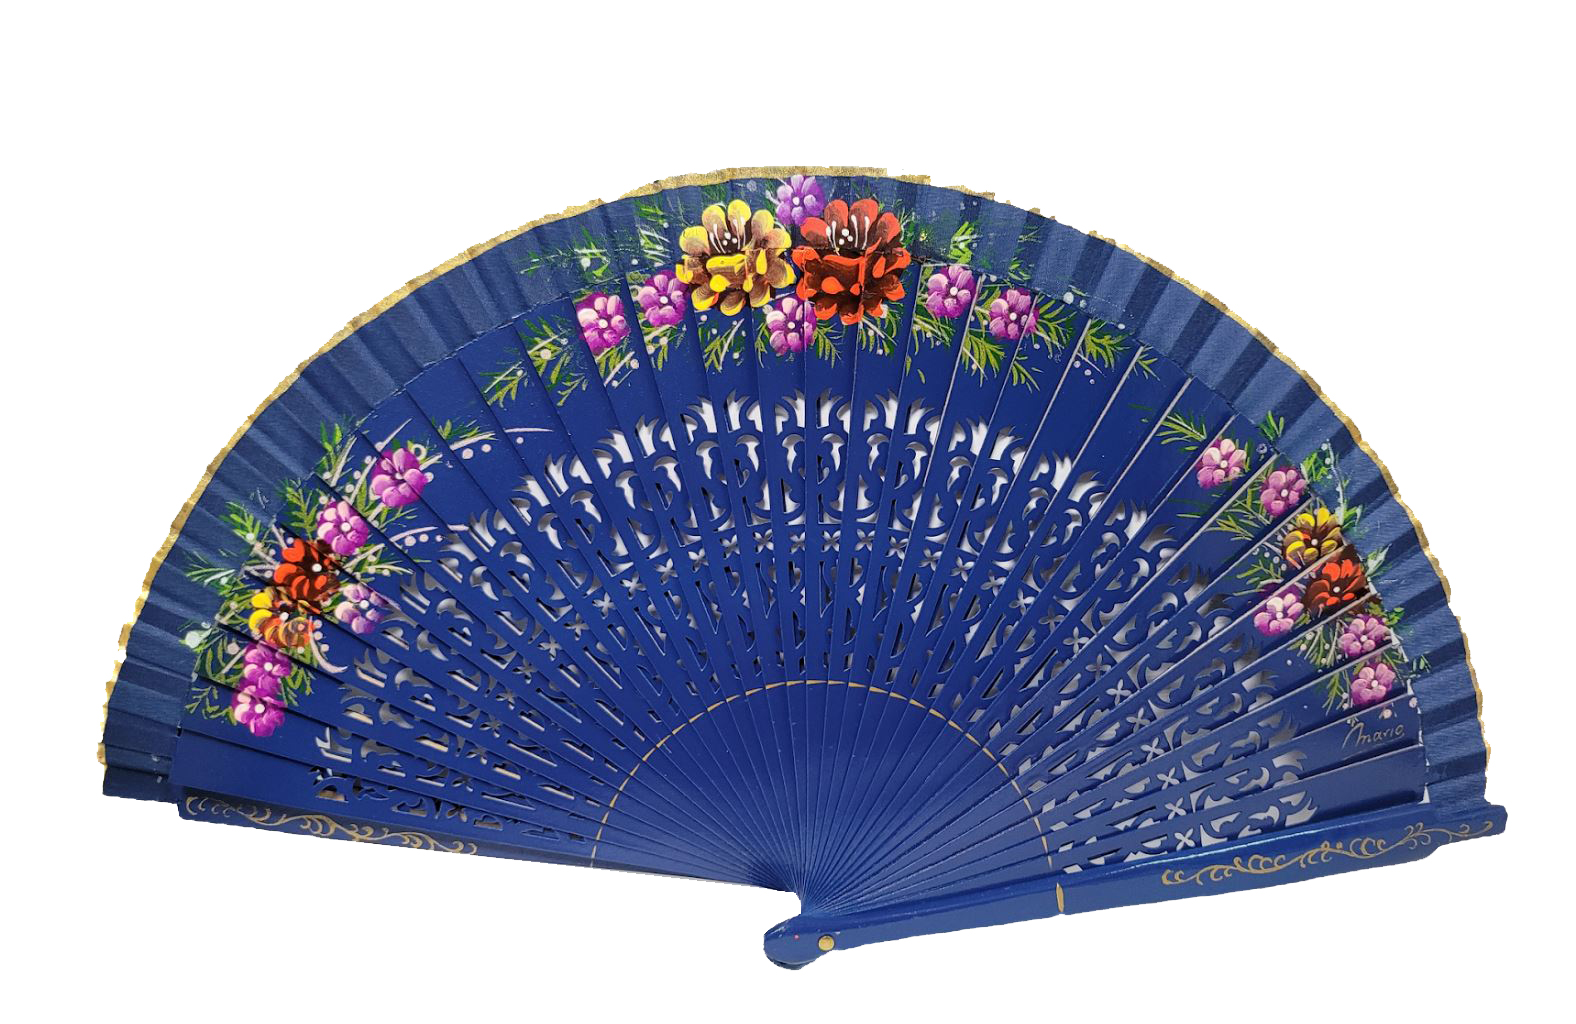 Fretwork Fan and Painted by Two Faces. ref 1138